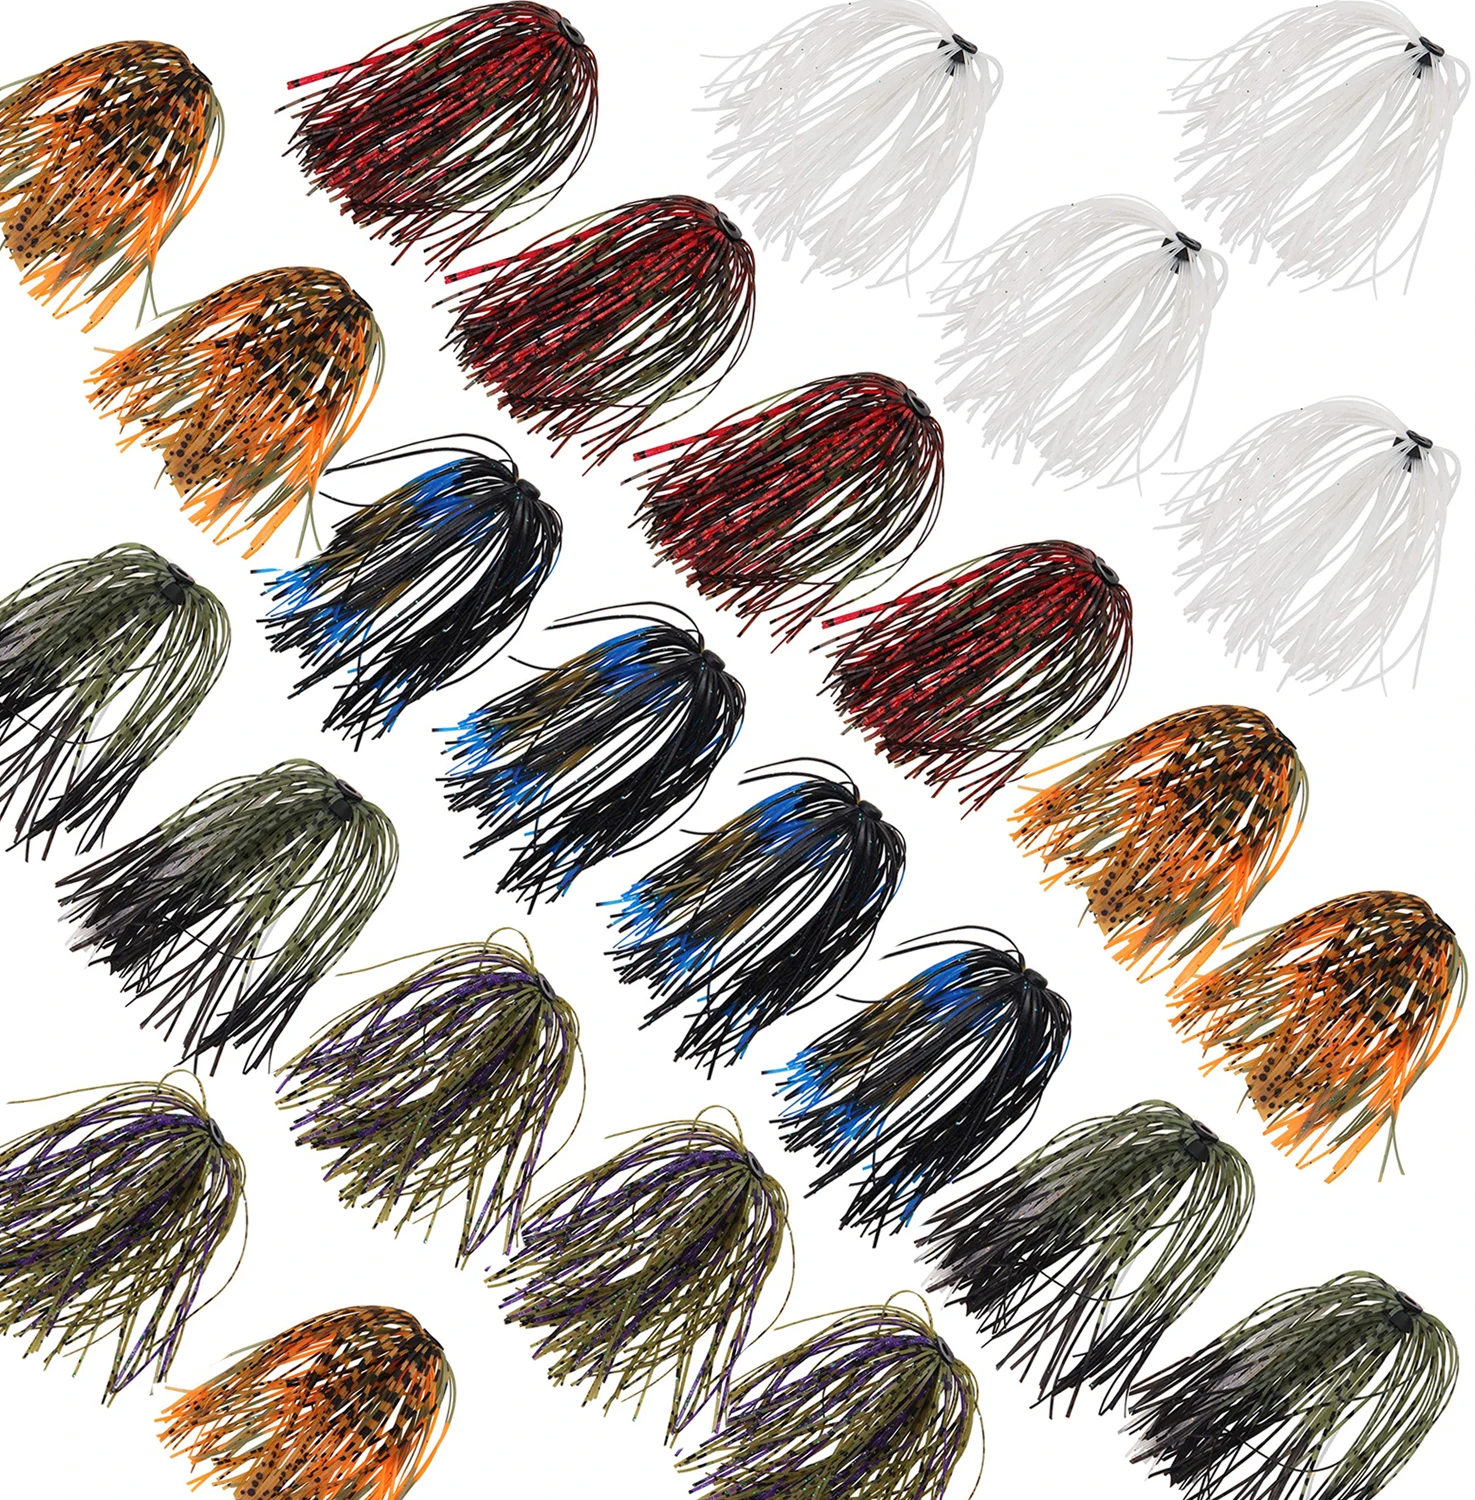 Fishing Silicone Skirts Lures 25/50 Bundles 50 Strands Jigs Spinnerbait Buzzbait Spoon Blade Squid Jig Skirt Fly Tying Material